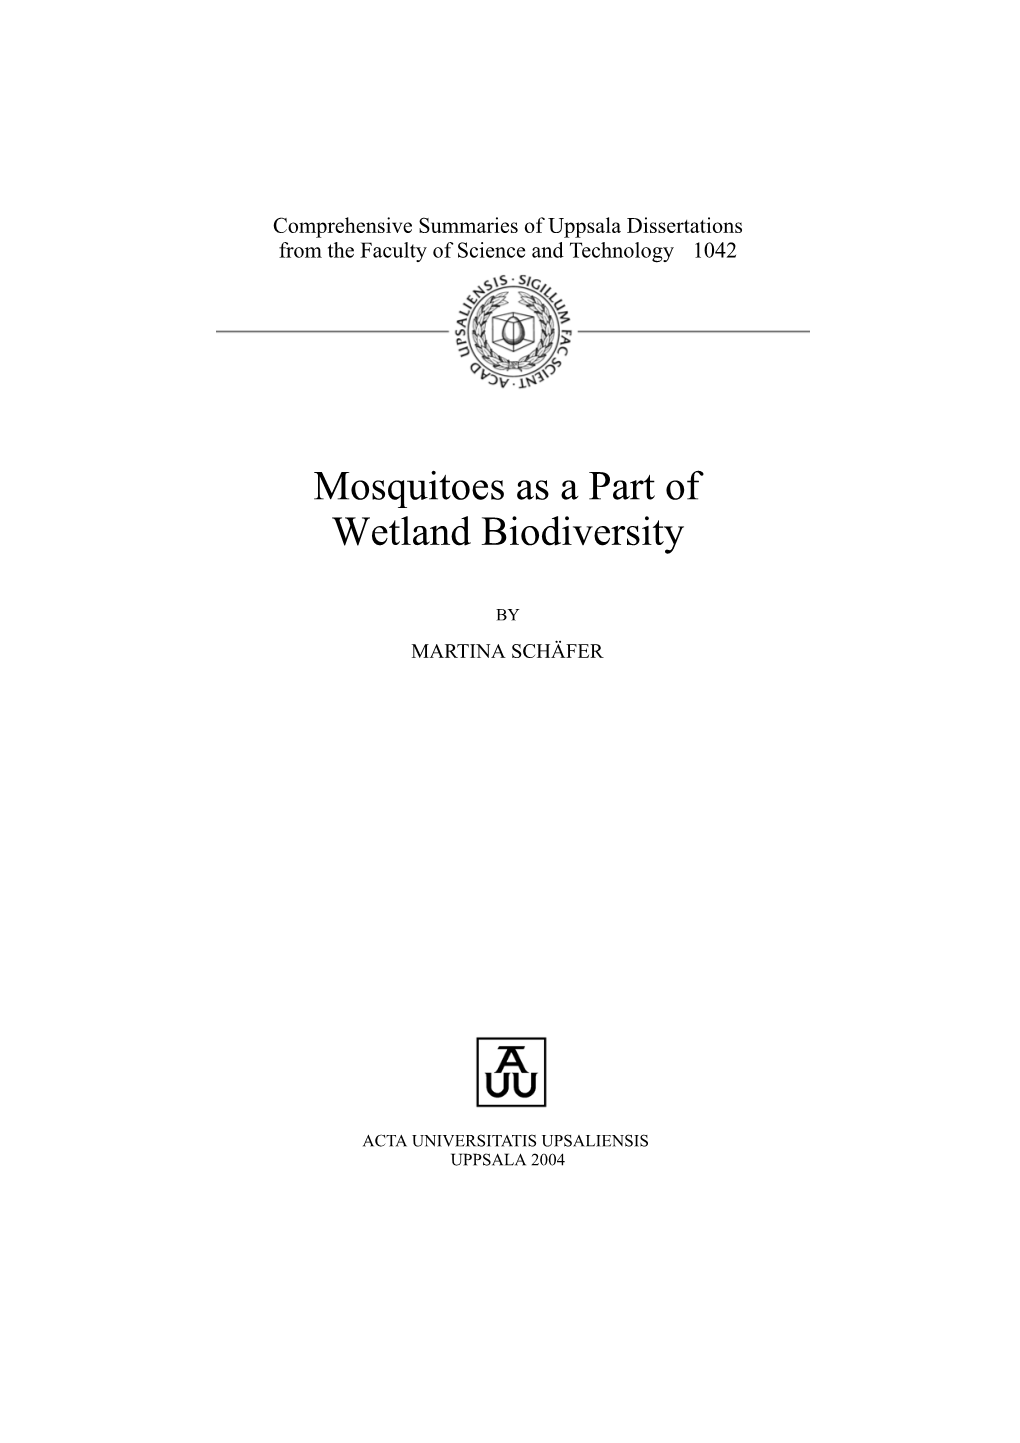 Mosquitoes As a Part of Wetland Biodiversity